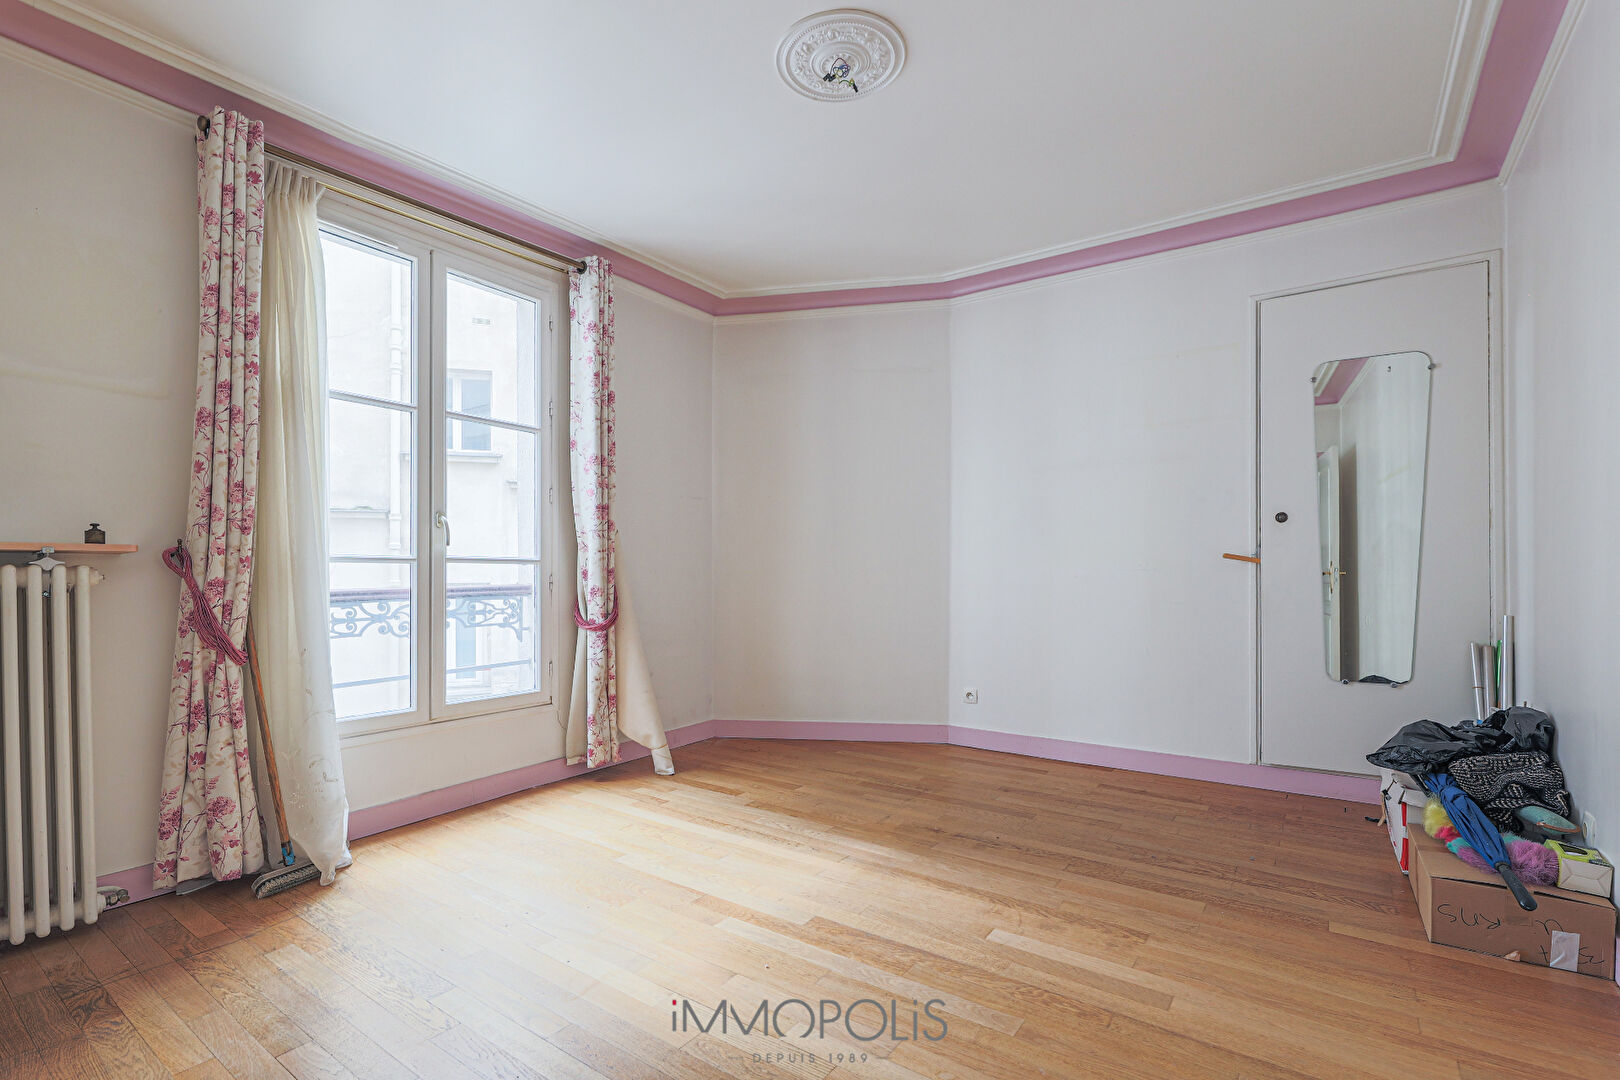 Beautiful 3 rooms at the compact plan in Montmartre, rue Ravignan 10